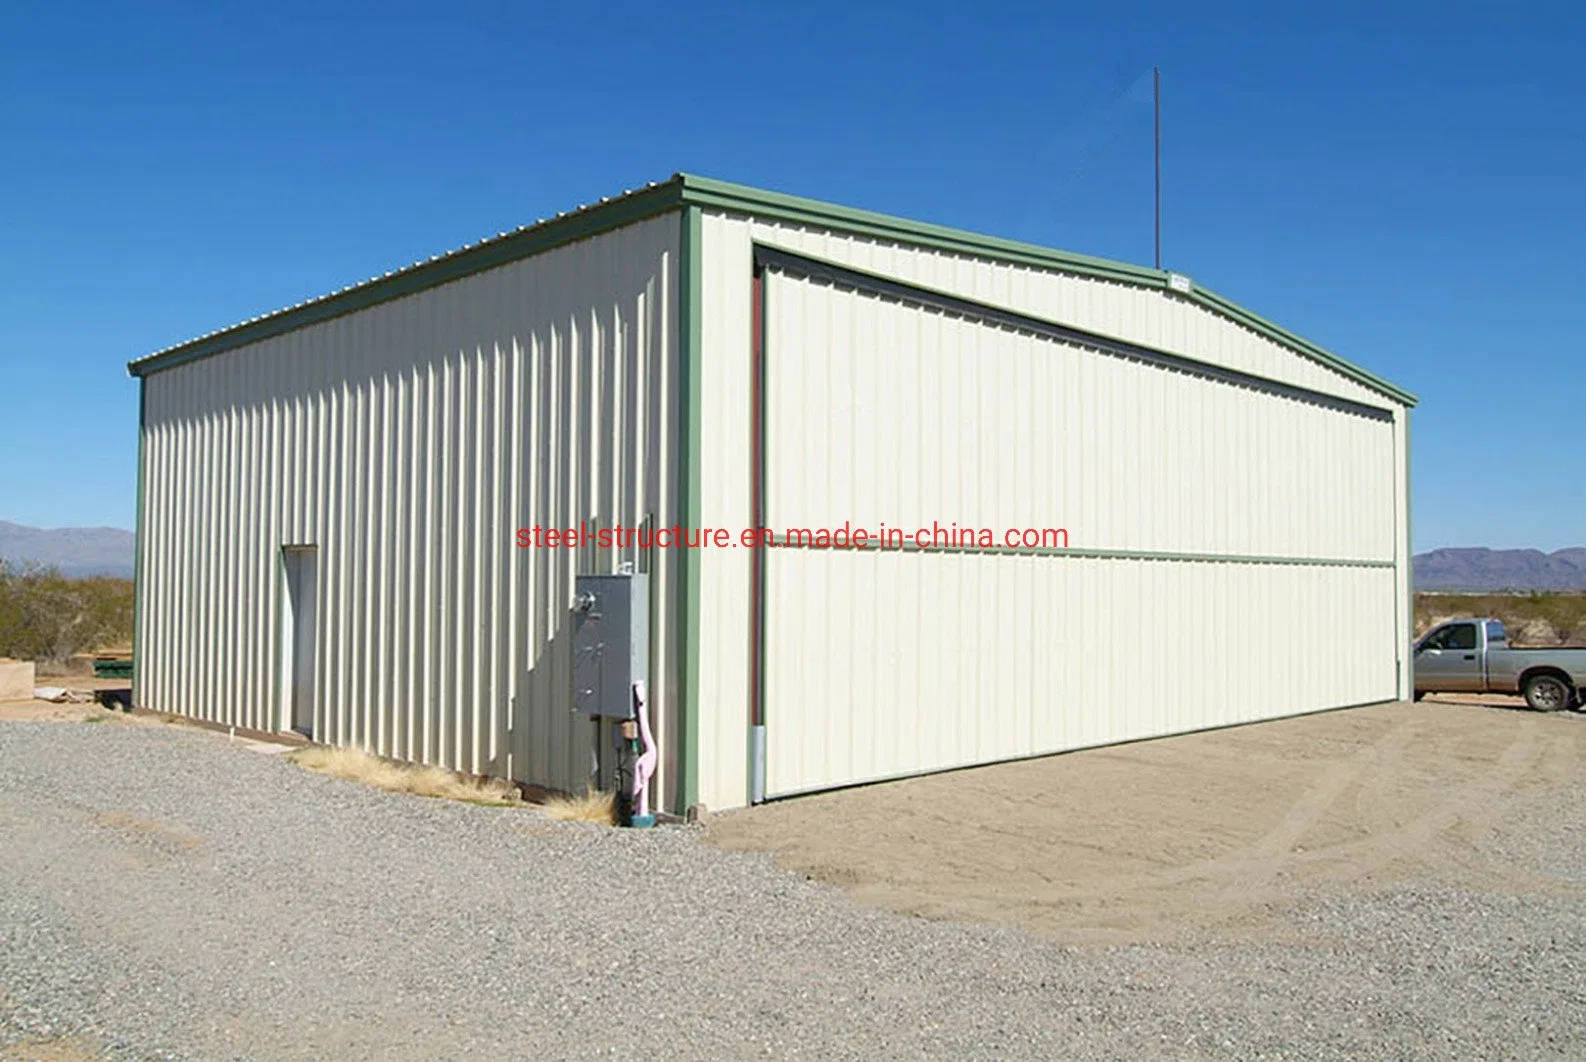 Light Steel Structure Cage & Coop for Poultry, Livestock with Low Cost